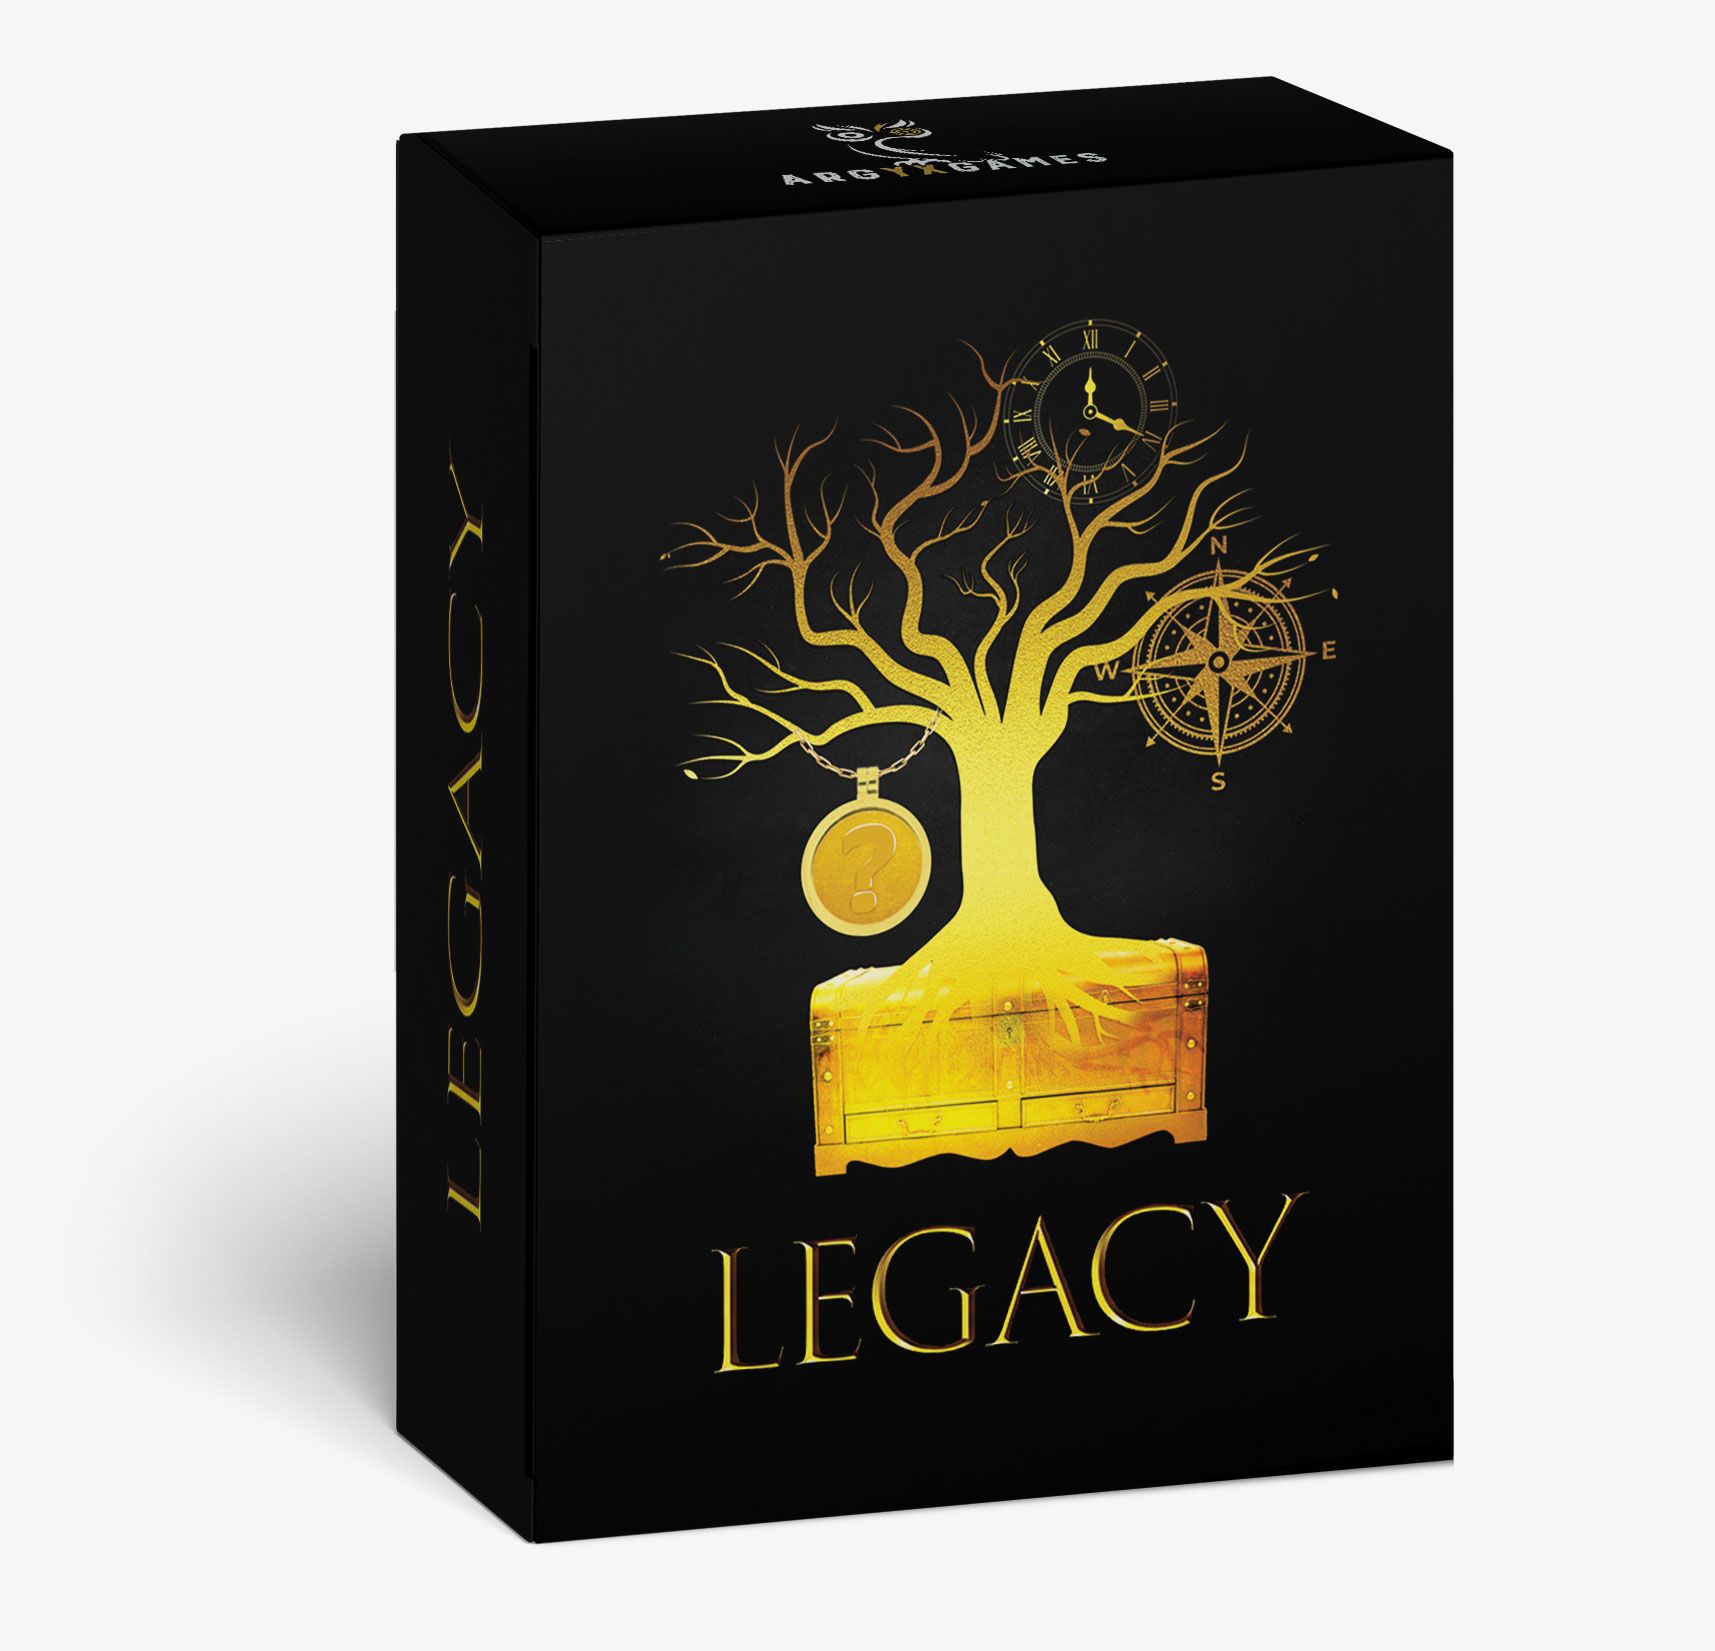 LEGACY: Quest for a Family Treasure